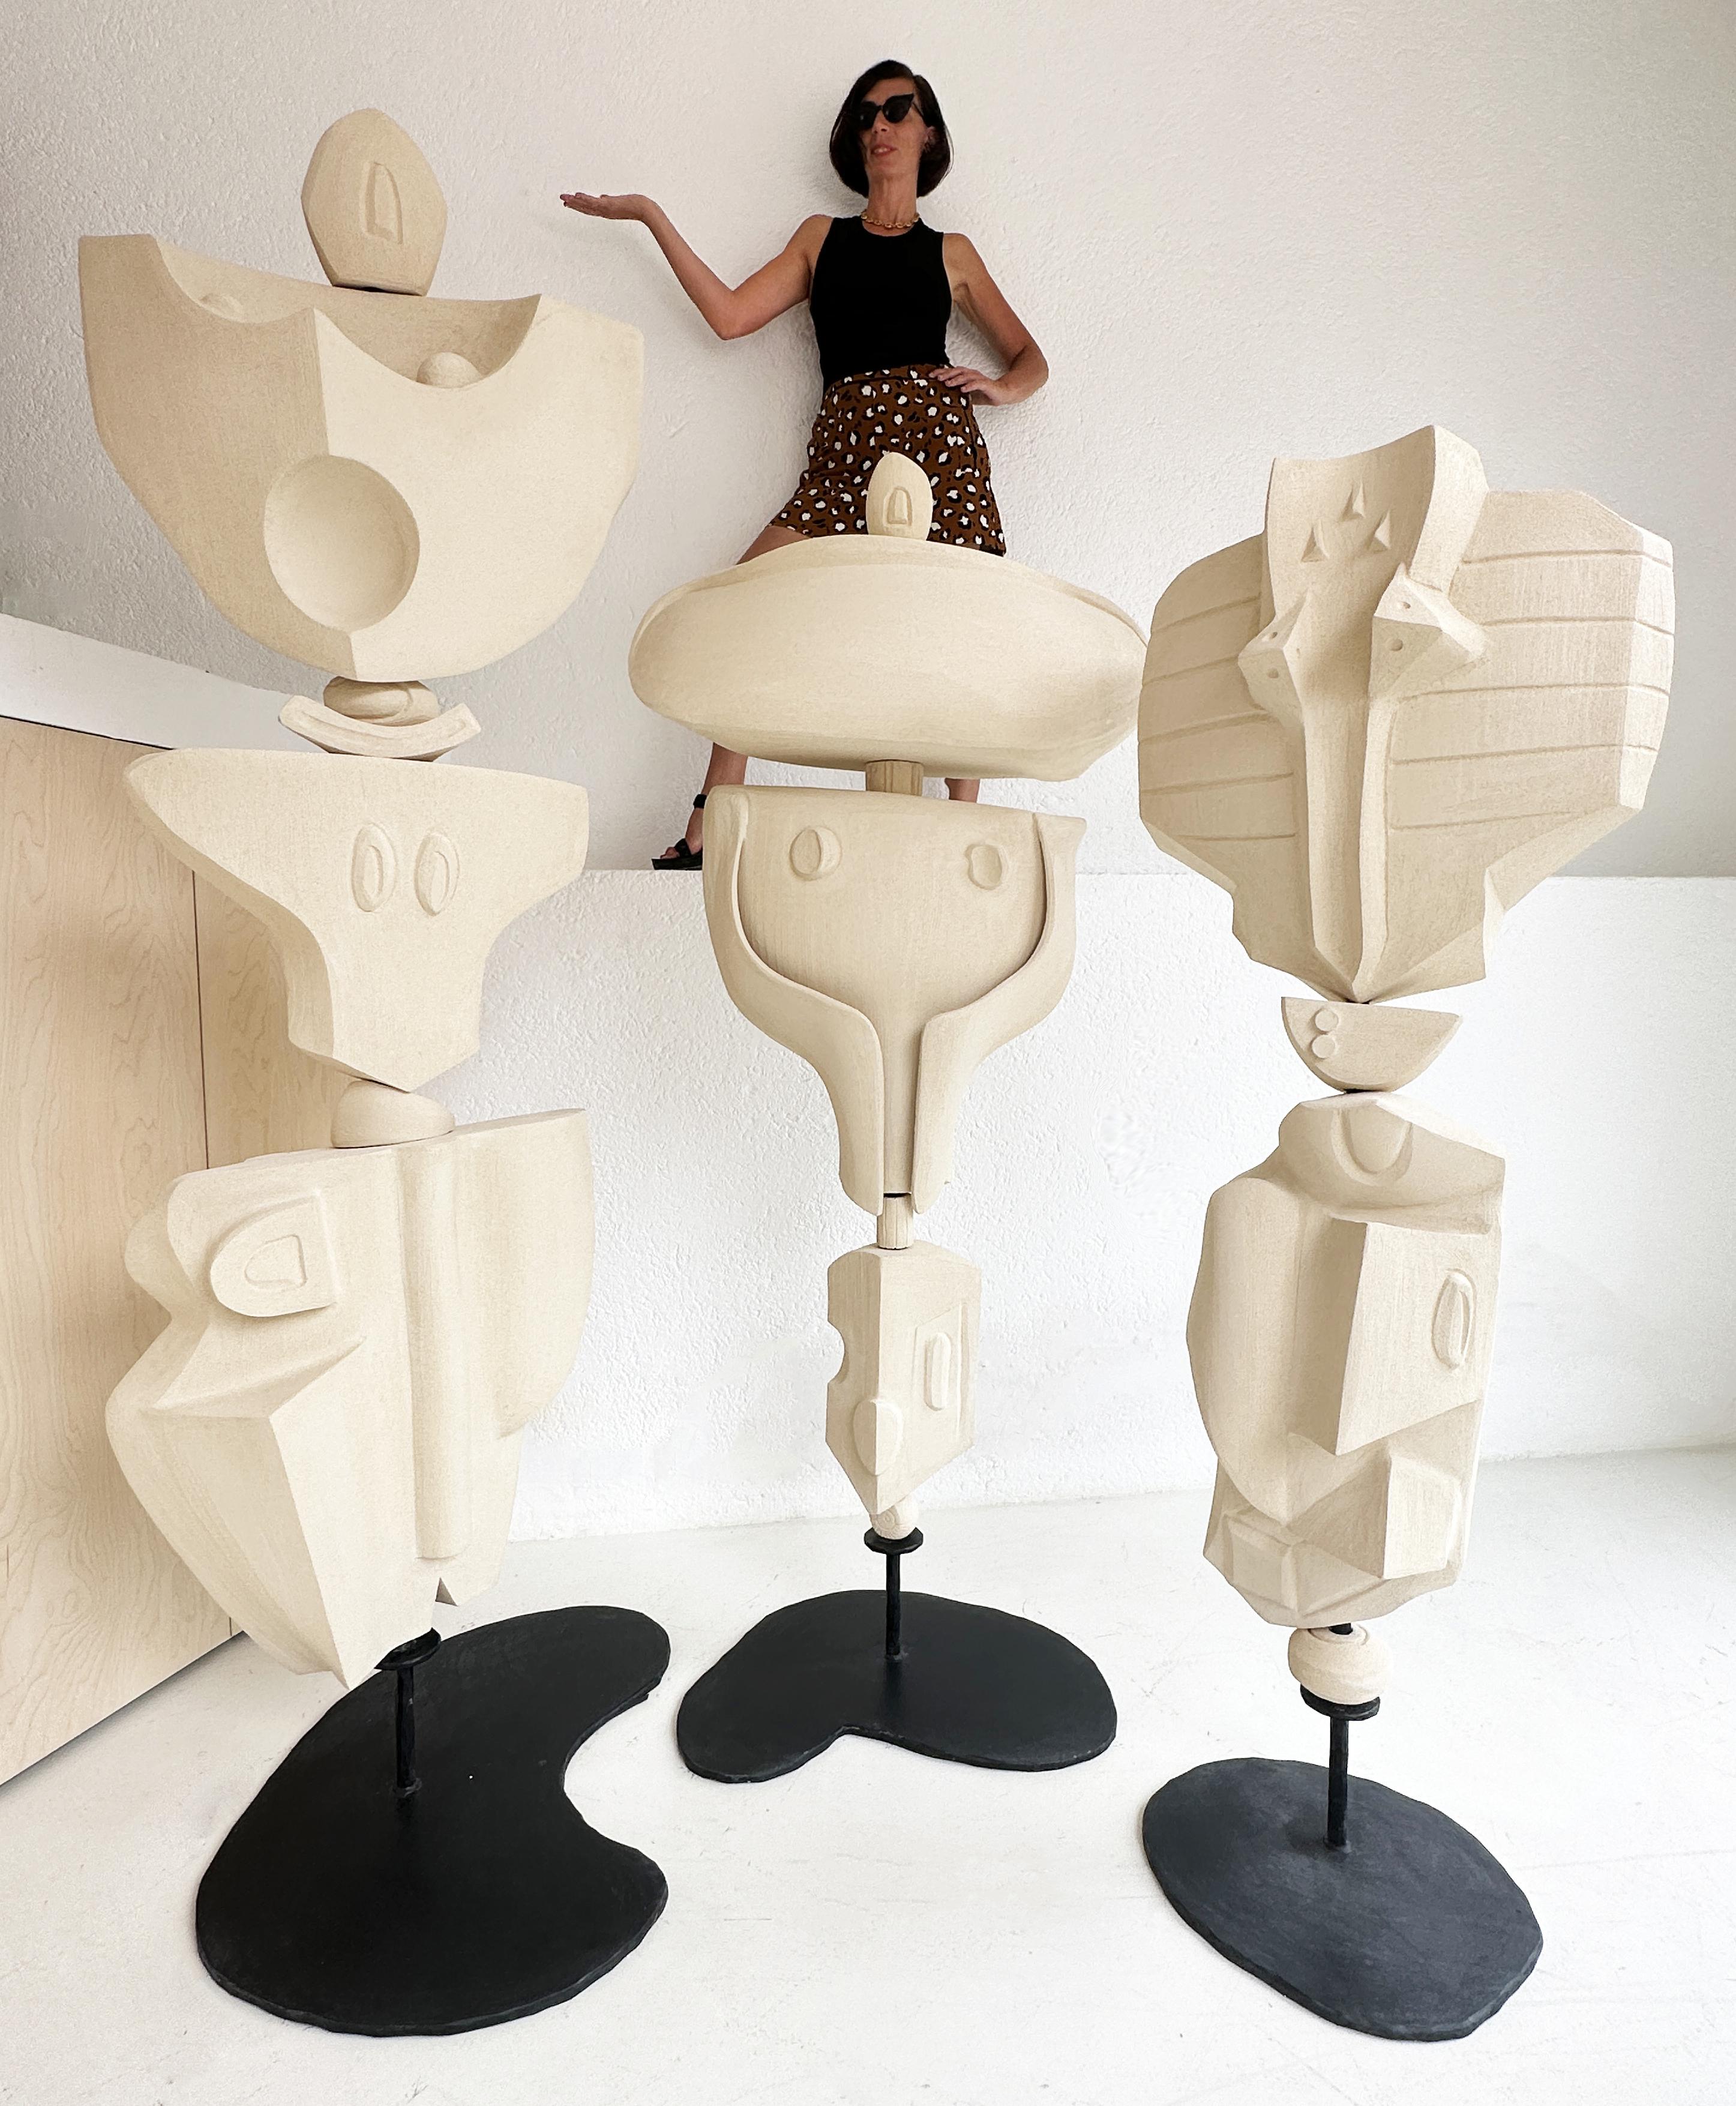 Set of 3 Totem by Olivia Cognet
Dimensions: Small: 170 cm, Medium: 190 cm, Large: 220 cm
Materials: Ceramic.
 
Each of Olivia’s handmade creations is a unique work of art, the snapshot of a precious moment captured in a world of fast